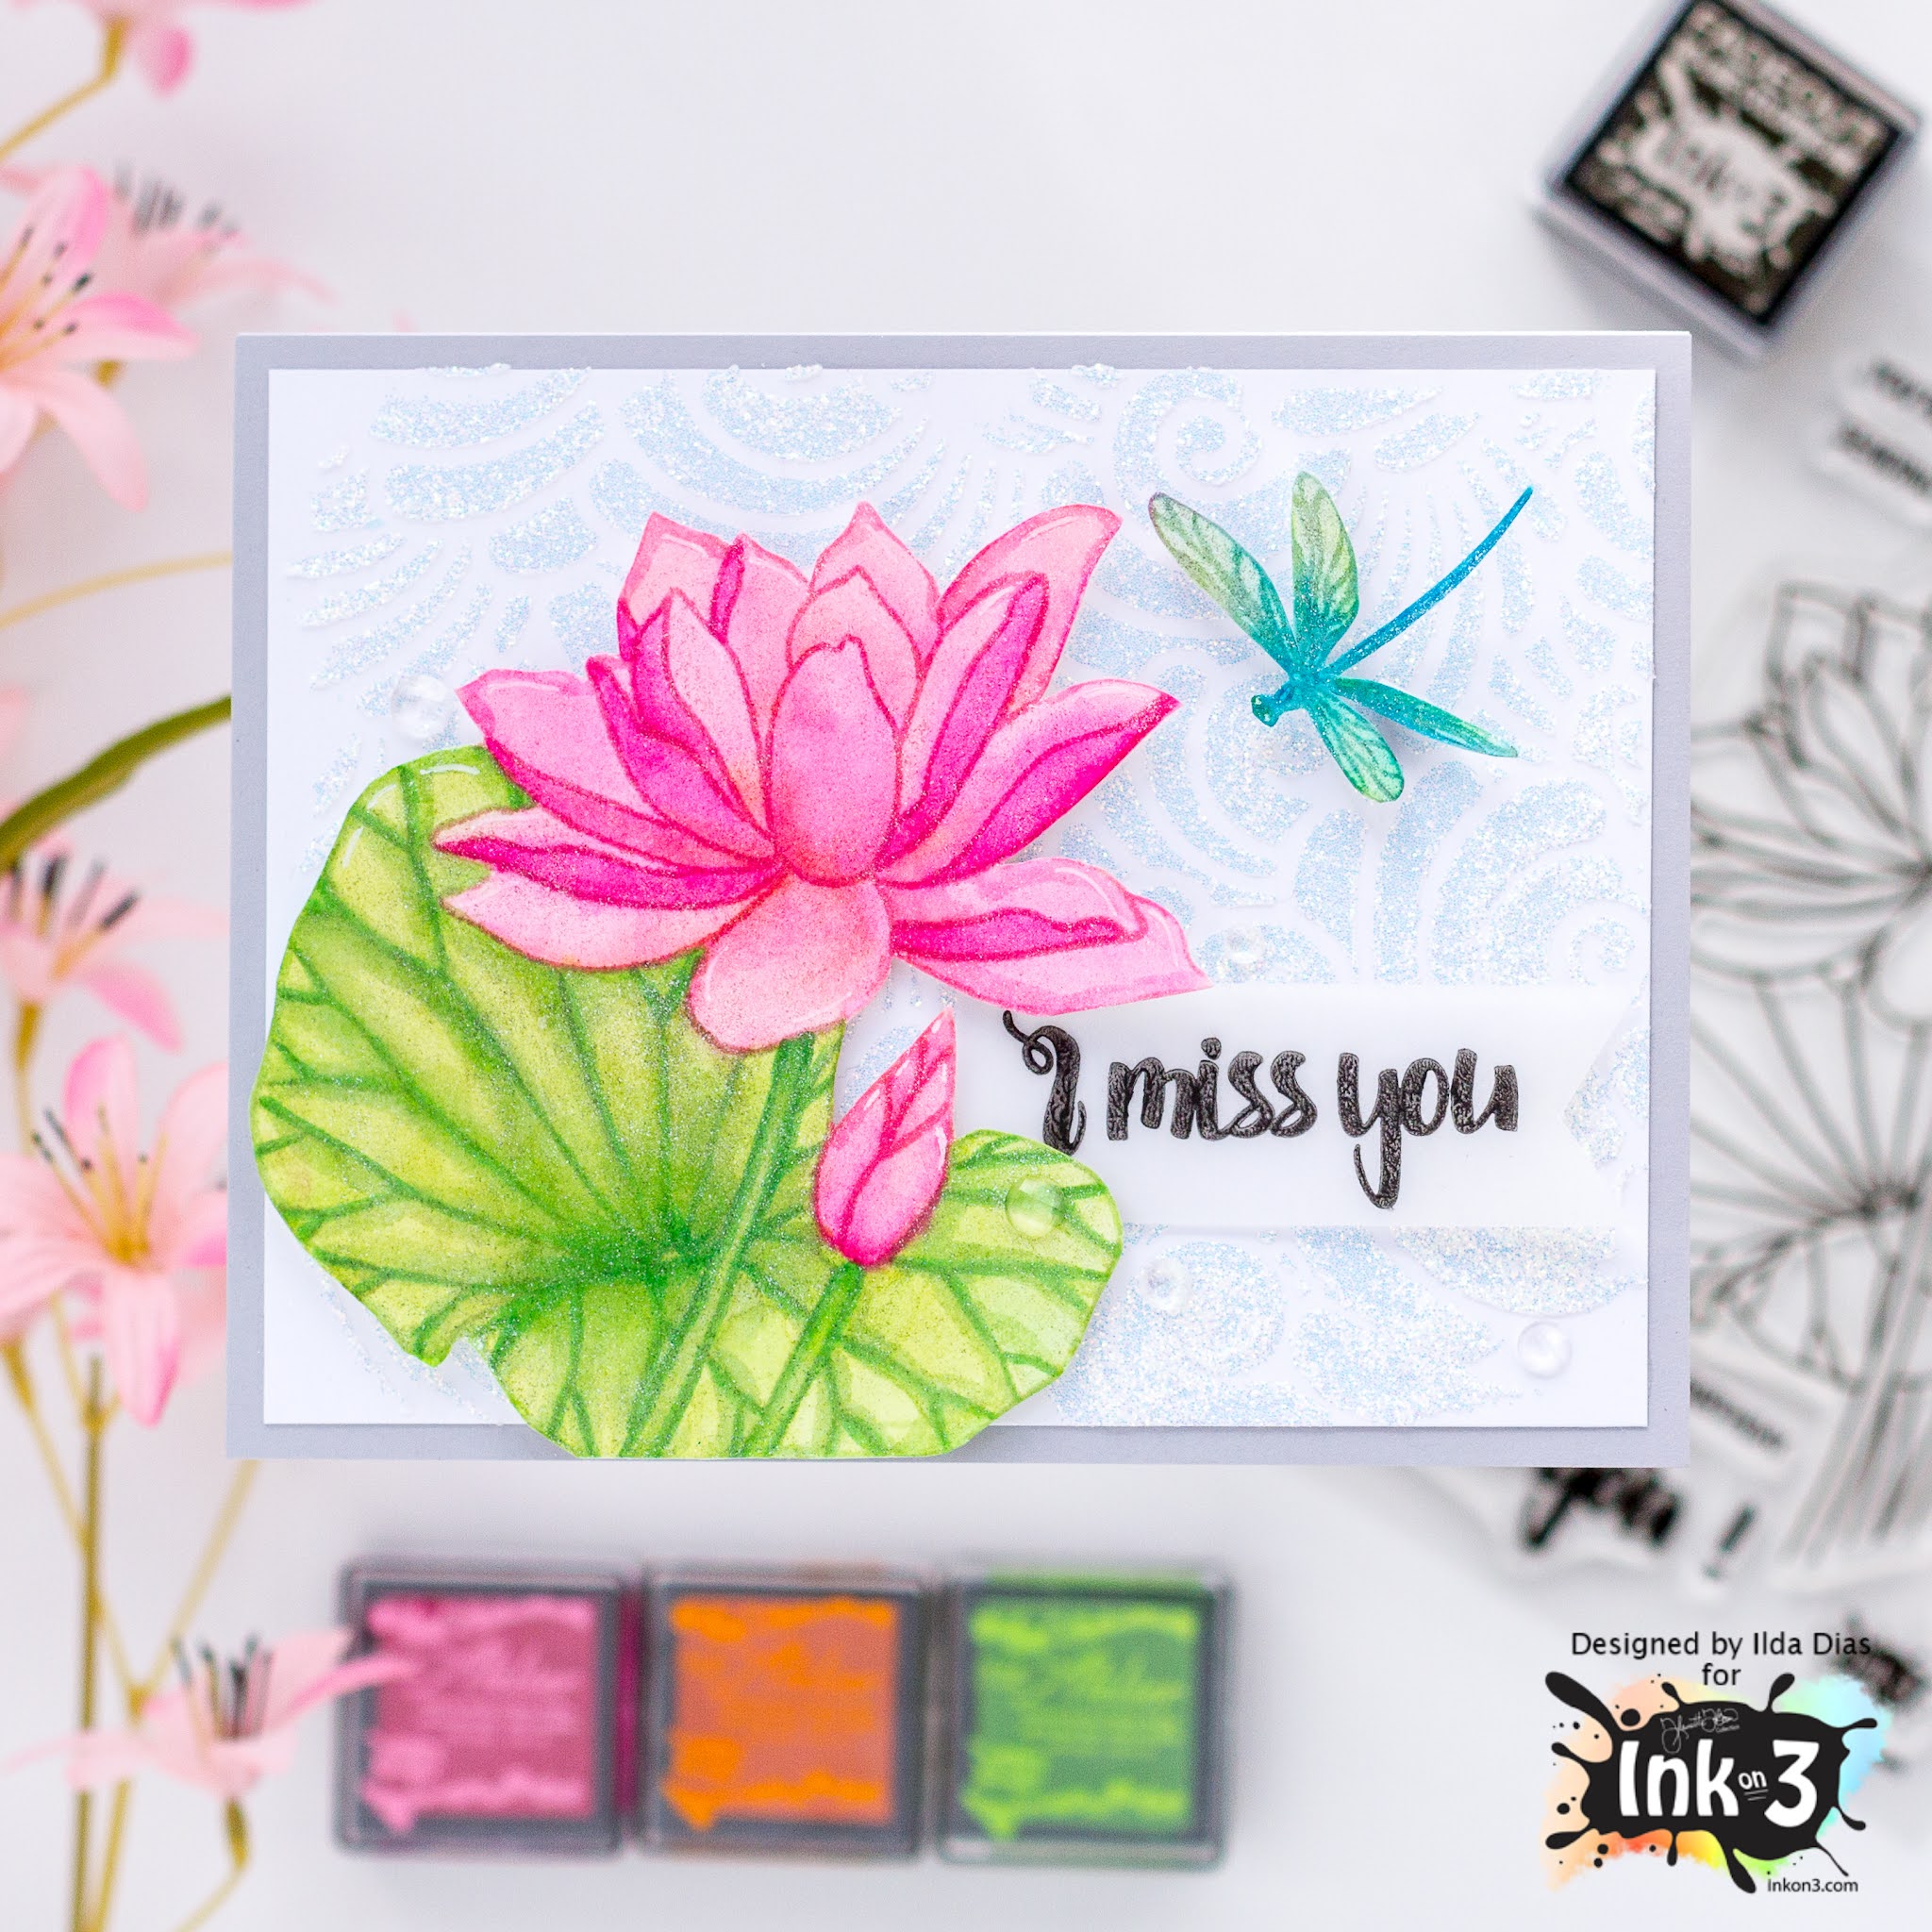 I Love Doing All Things Crafty: I You A Card | Ink On 3